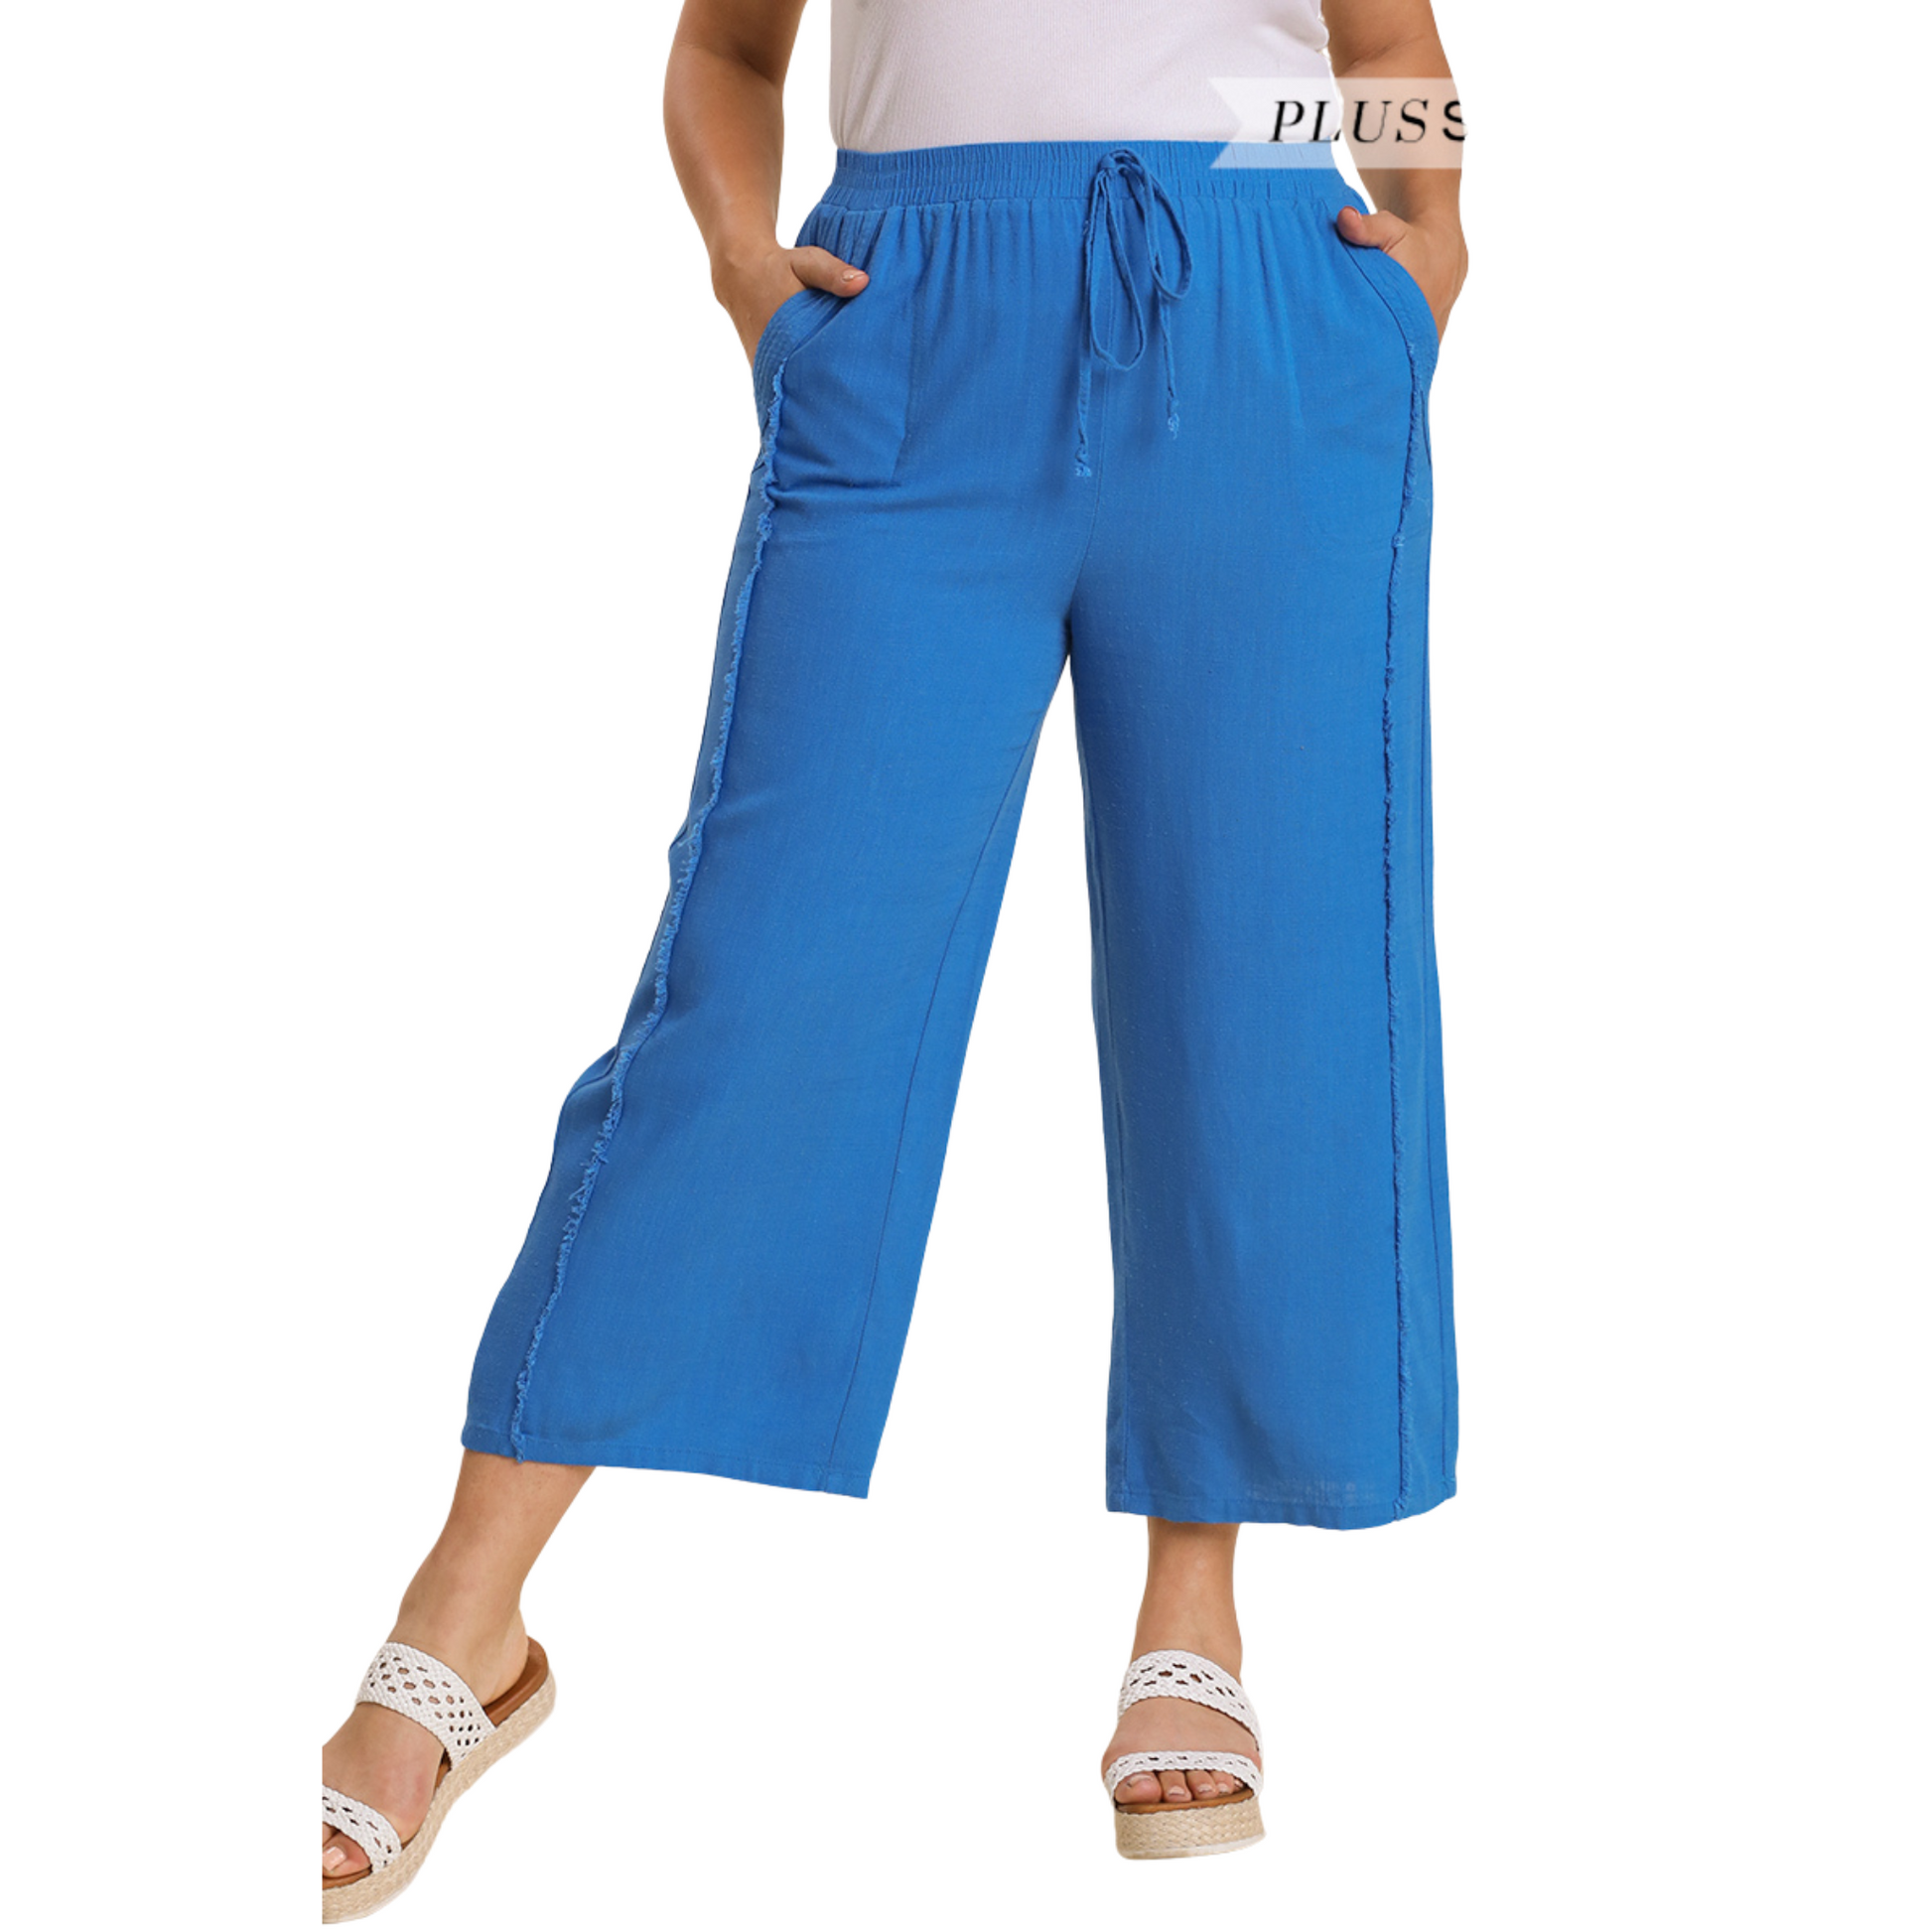 Our Linen Blend Wide Leg Pants are the perfect choice for an effortless chic look! Crafted with a breathable linen blend fabric, these pants are available in classic blue and cream colors with a drawstring for adjustable fit. Wear them for summer days or to any casual occasion for timeless sophistication.